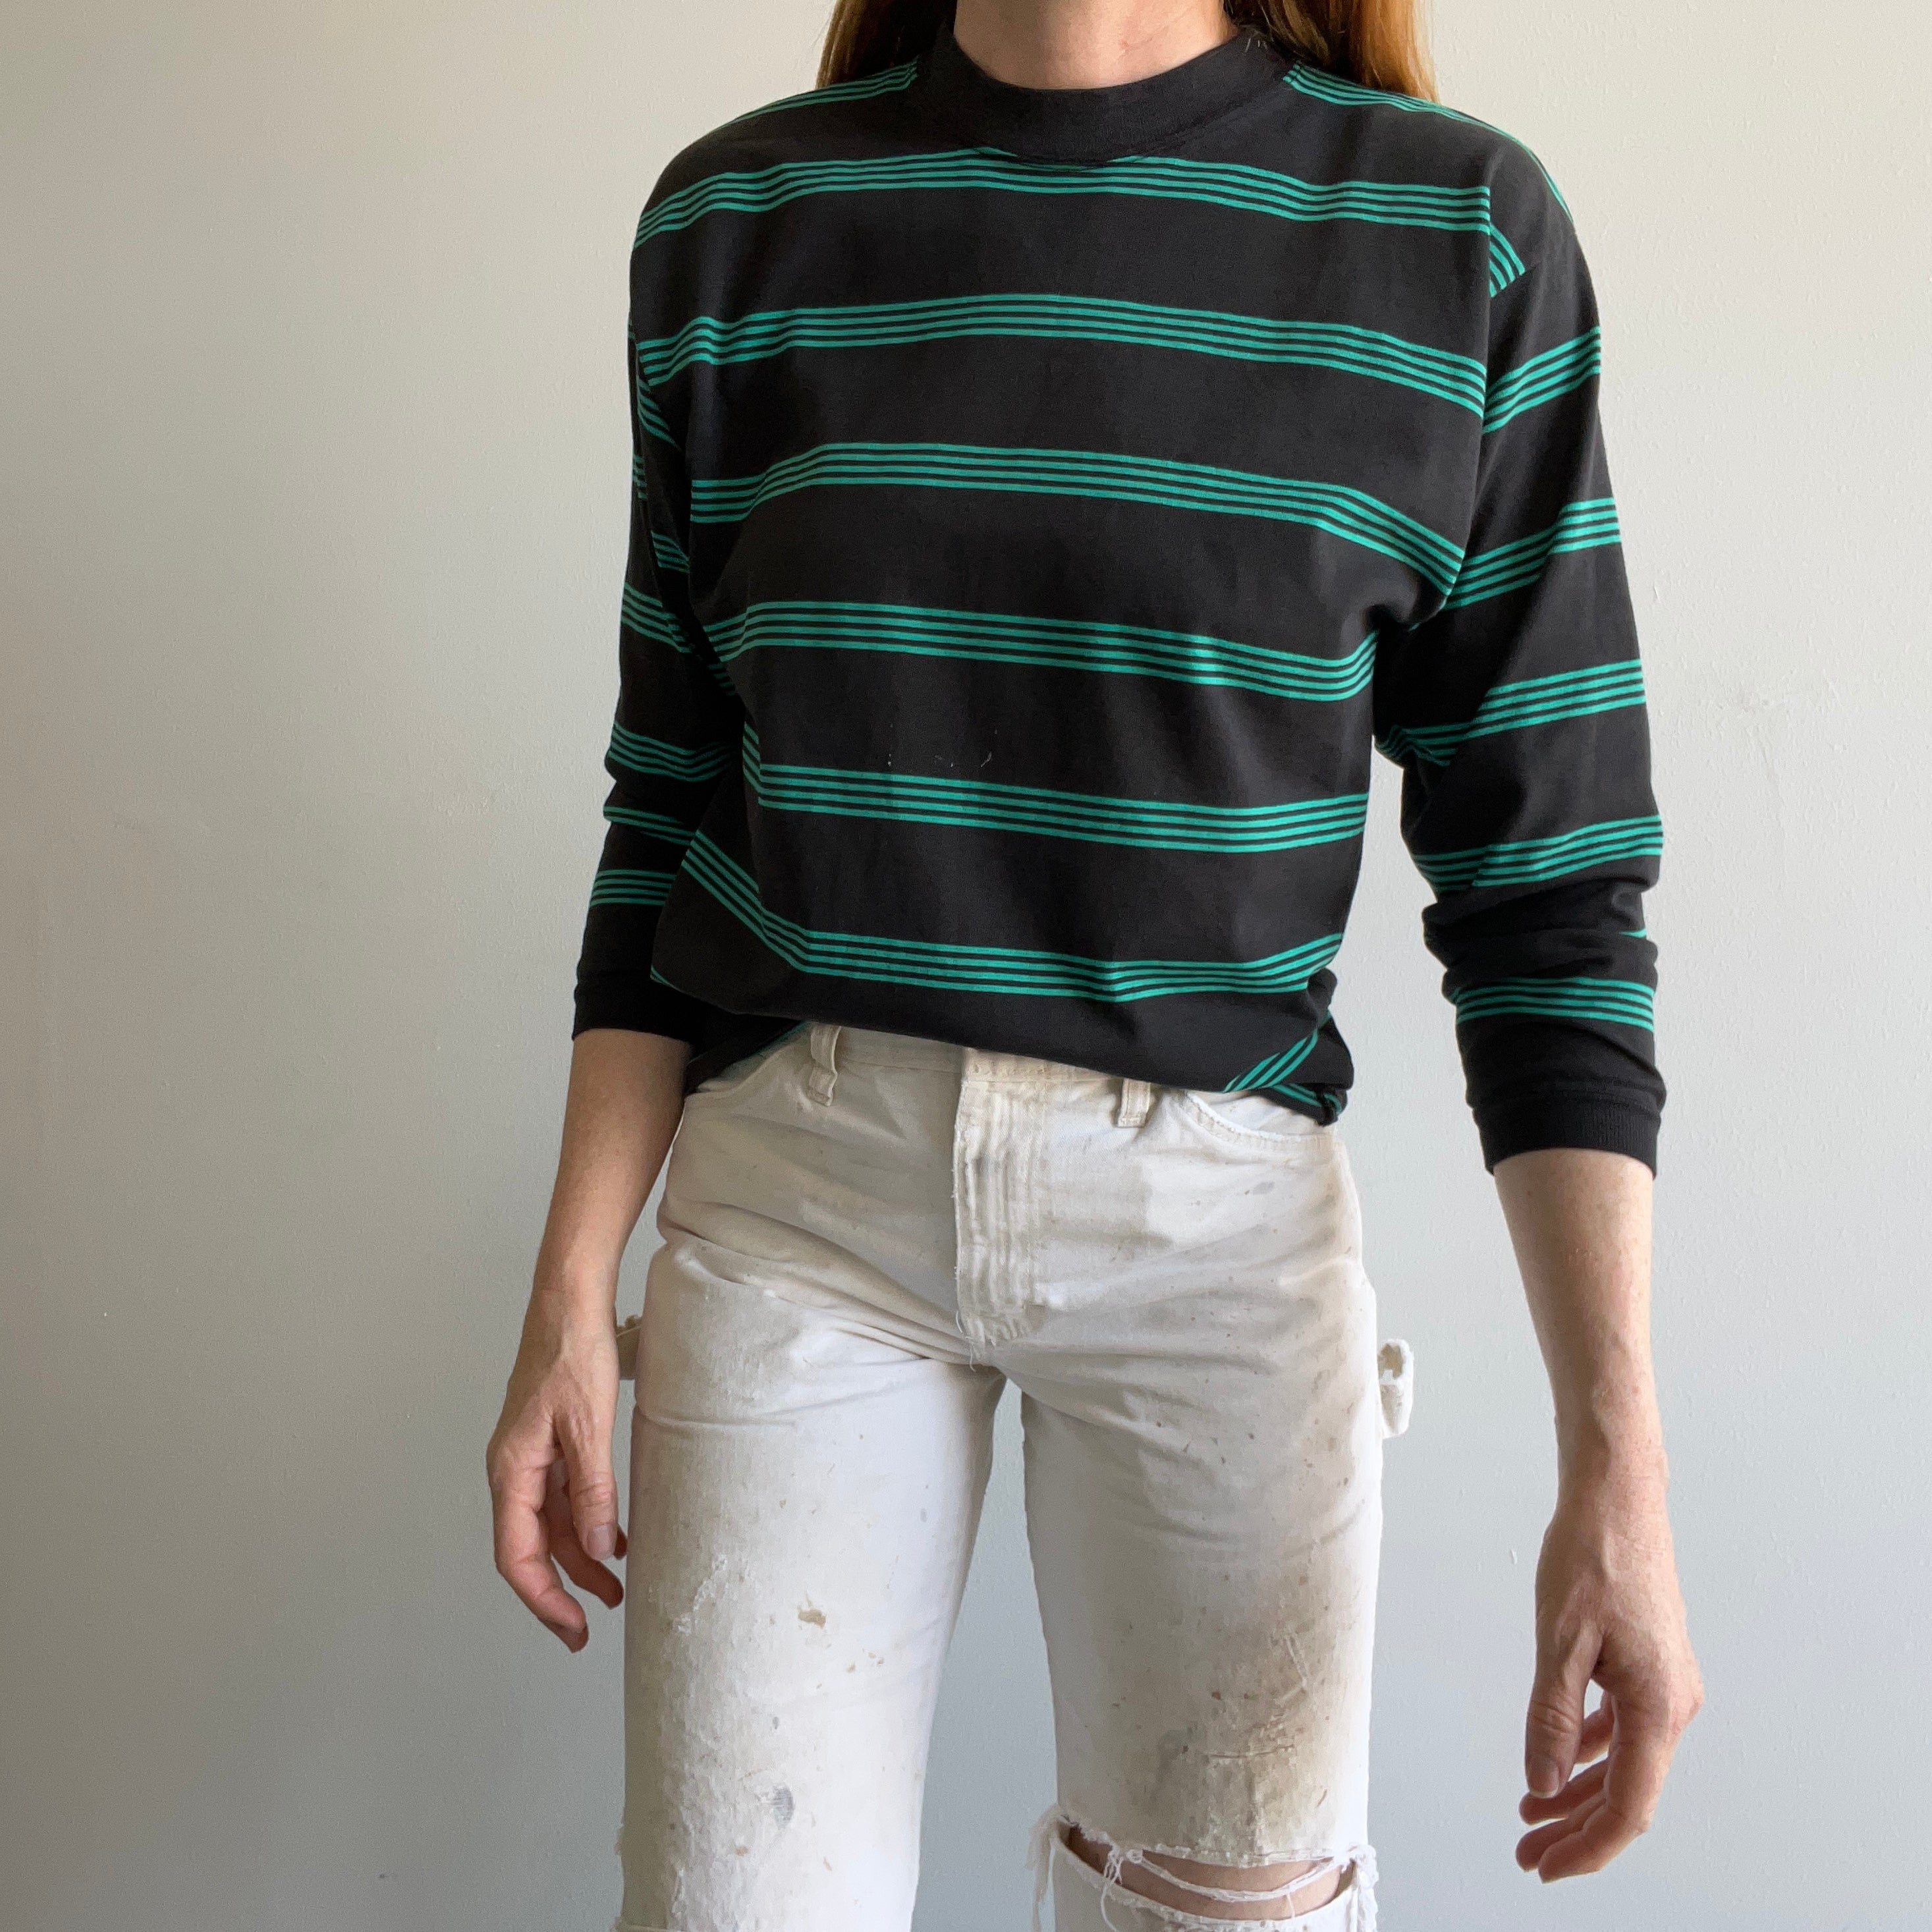 1980s Lee Brand Striped 3/4 Sleeve T-Shirt - YES PLEASE